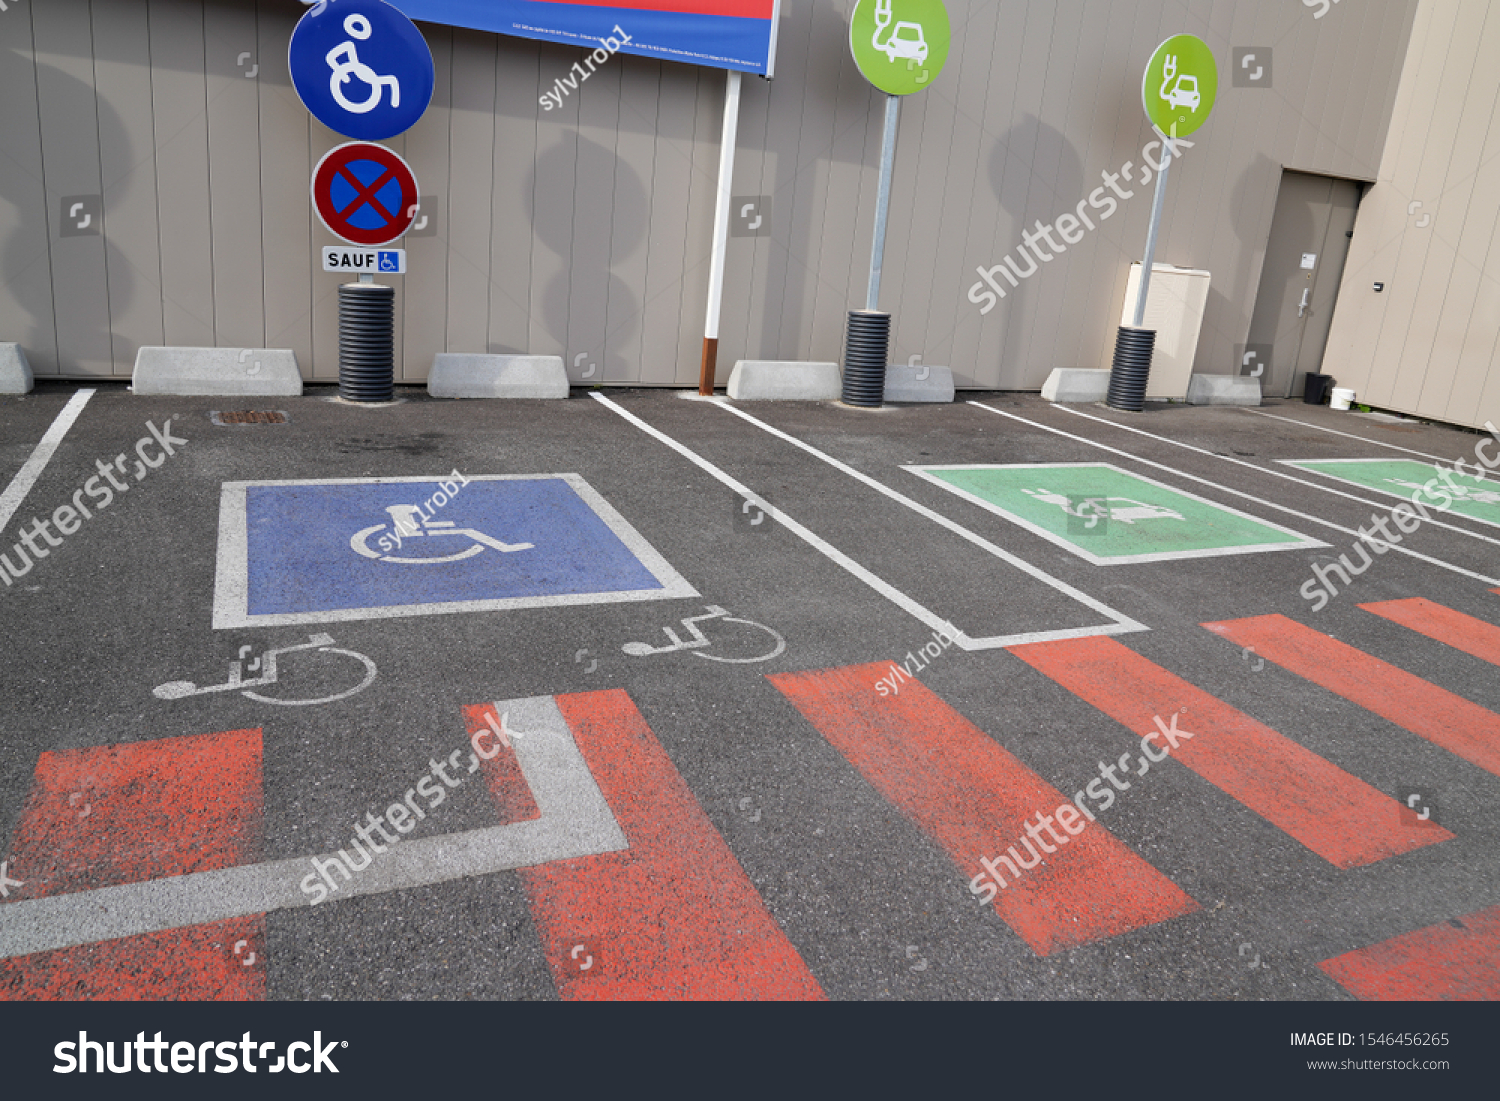 Handicapped parking car only electric vehicle ve pictogram on street #1546456265